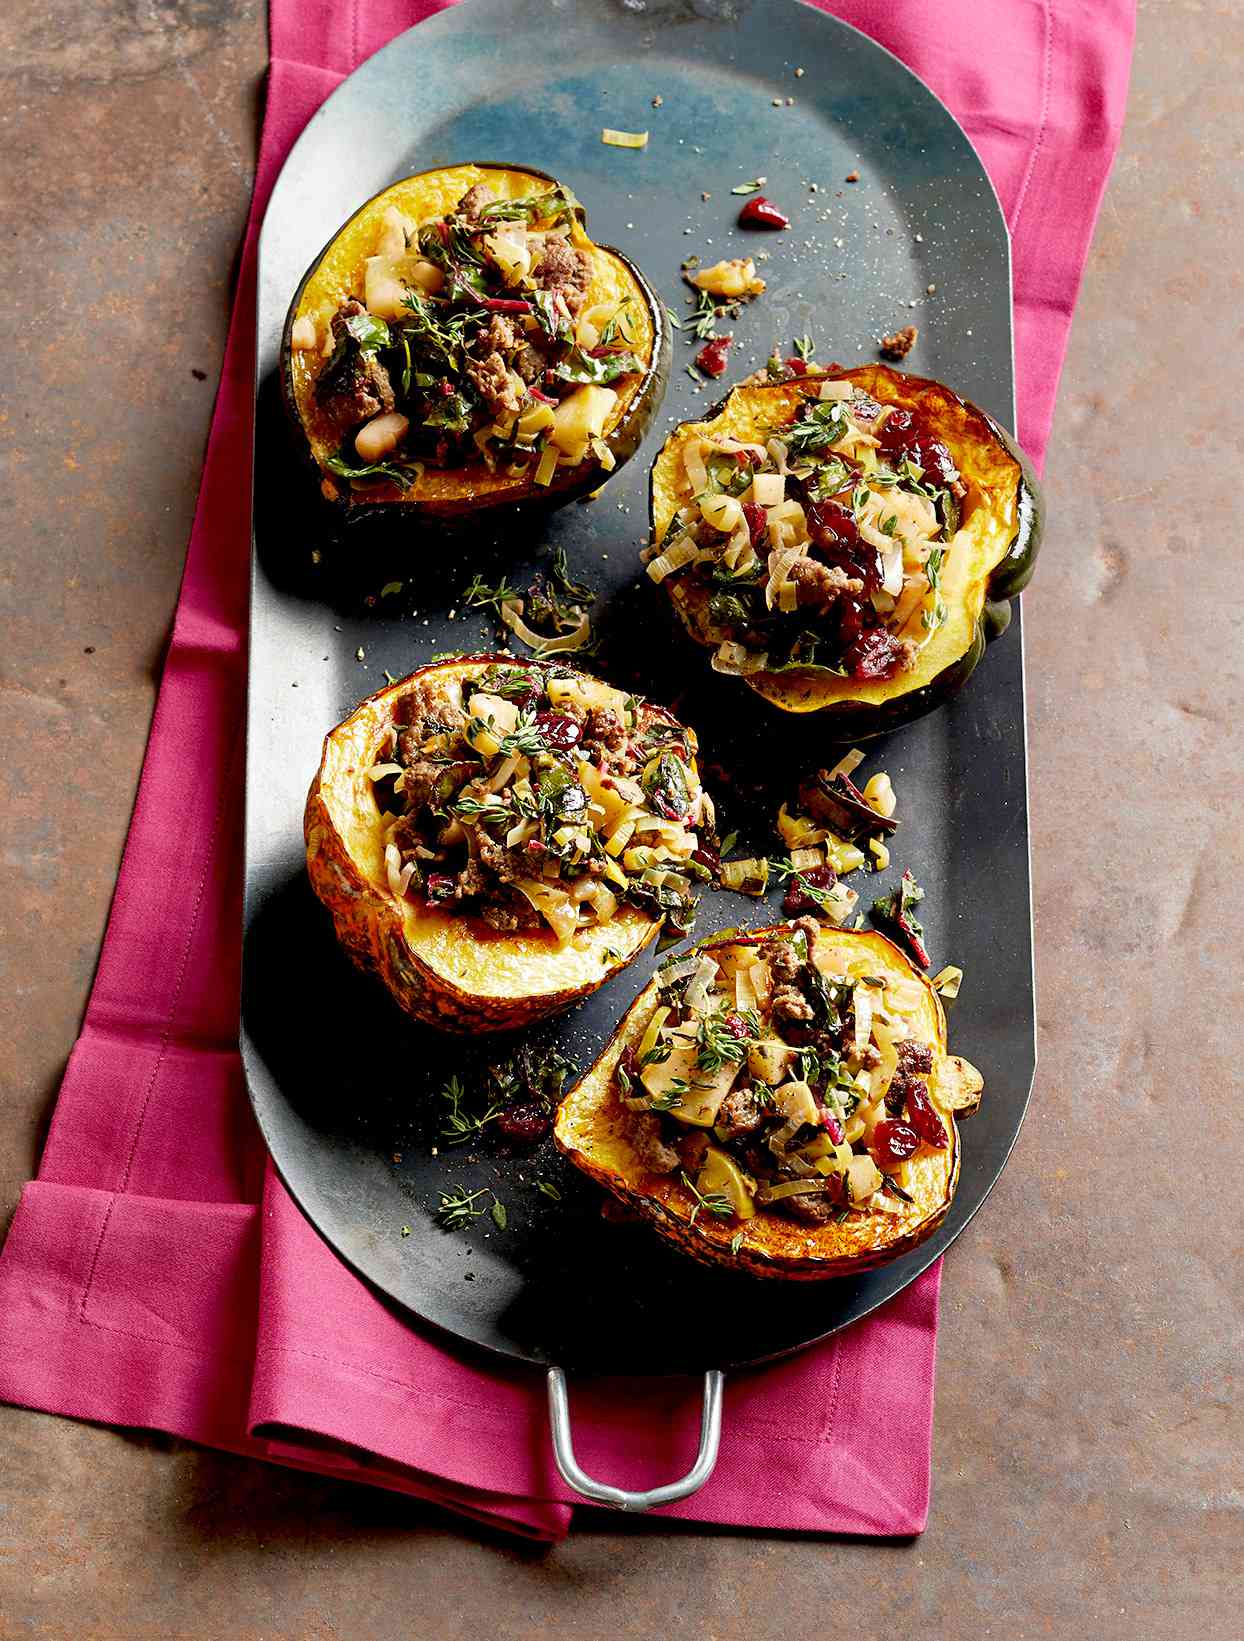 Roasted Acorn Squash with Sausage-Cranberry Stuffing